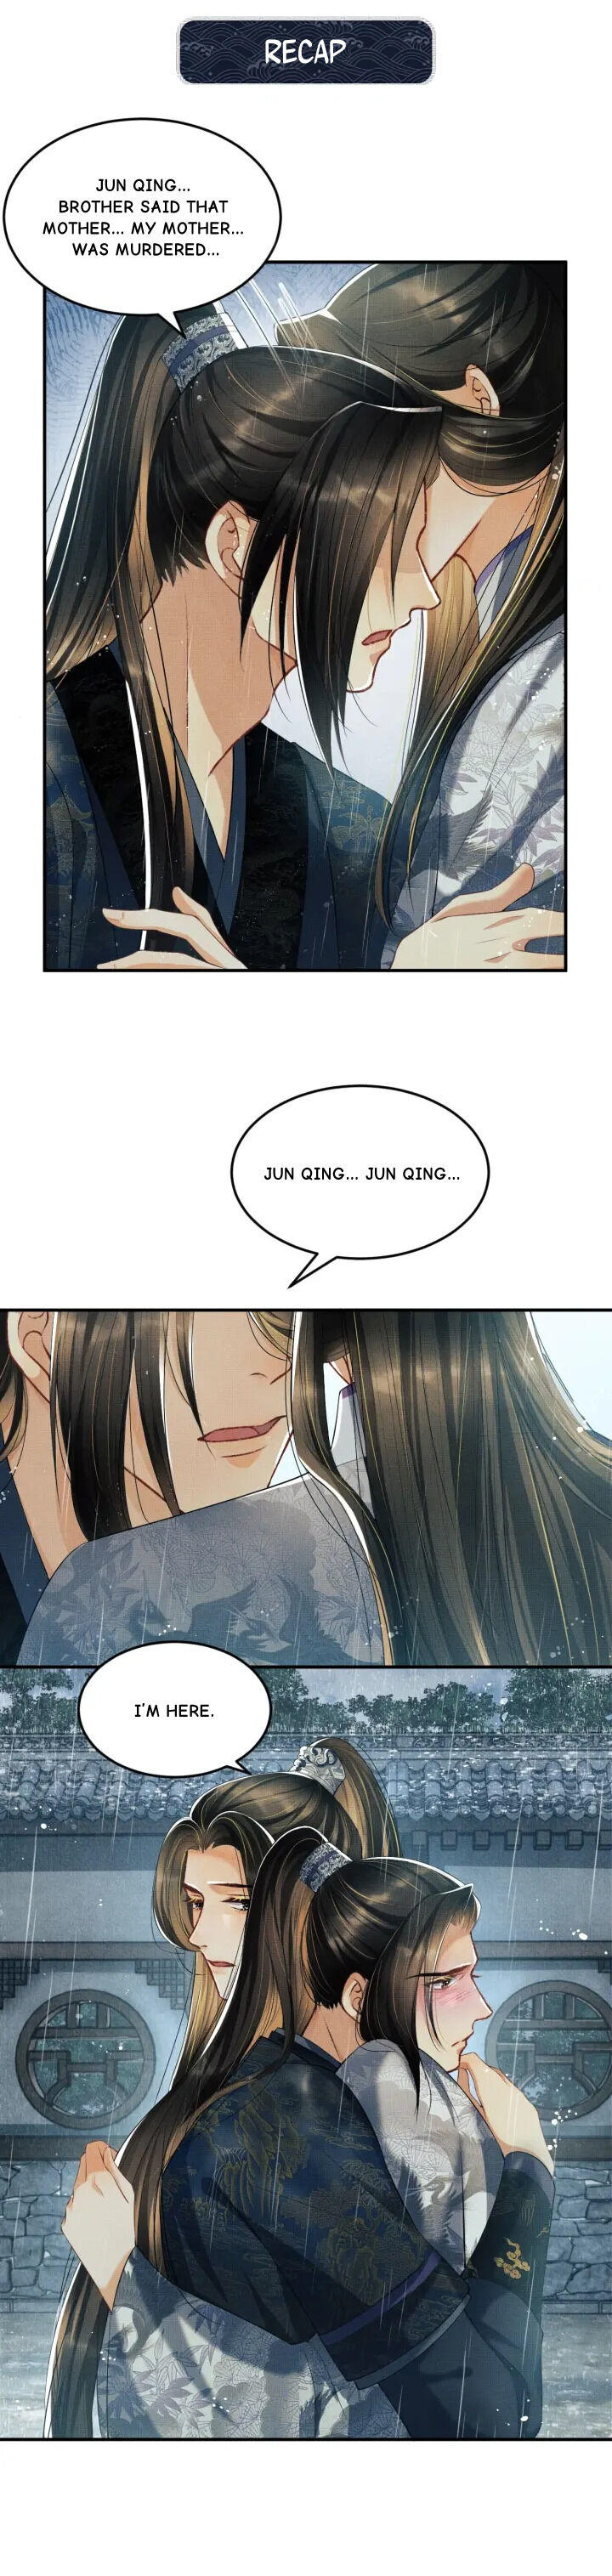 Read You Own My All Chapter 39 on Mangakakalot